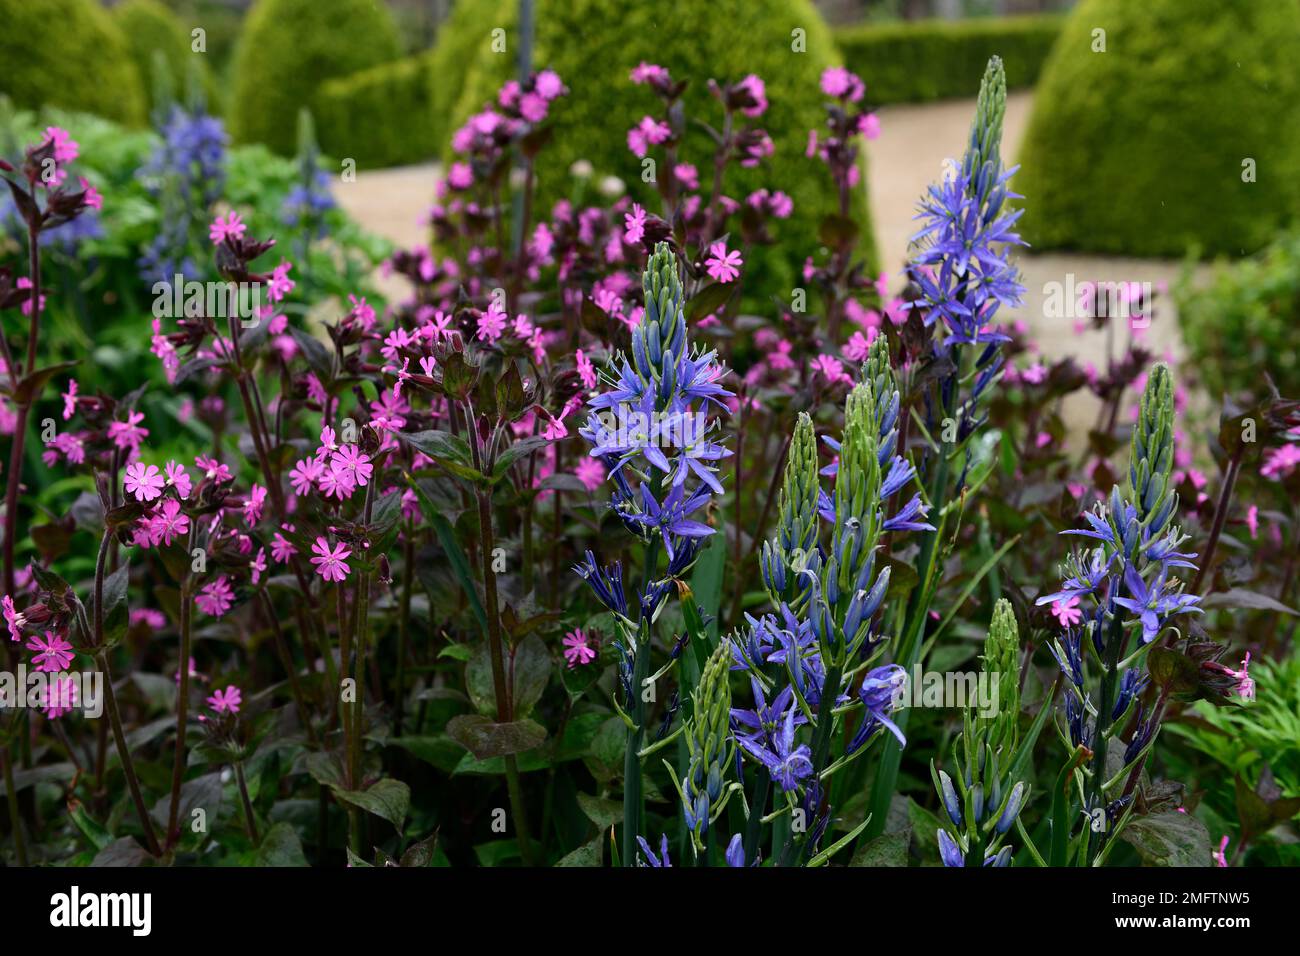 Camassia leichtinii Caerulea,silene dioica,blue and pink flowers,blue pink flower,flowering combination,camassia and silene,mixed planting,RM Floral Stock Photo